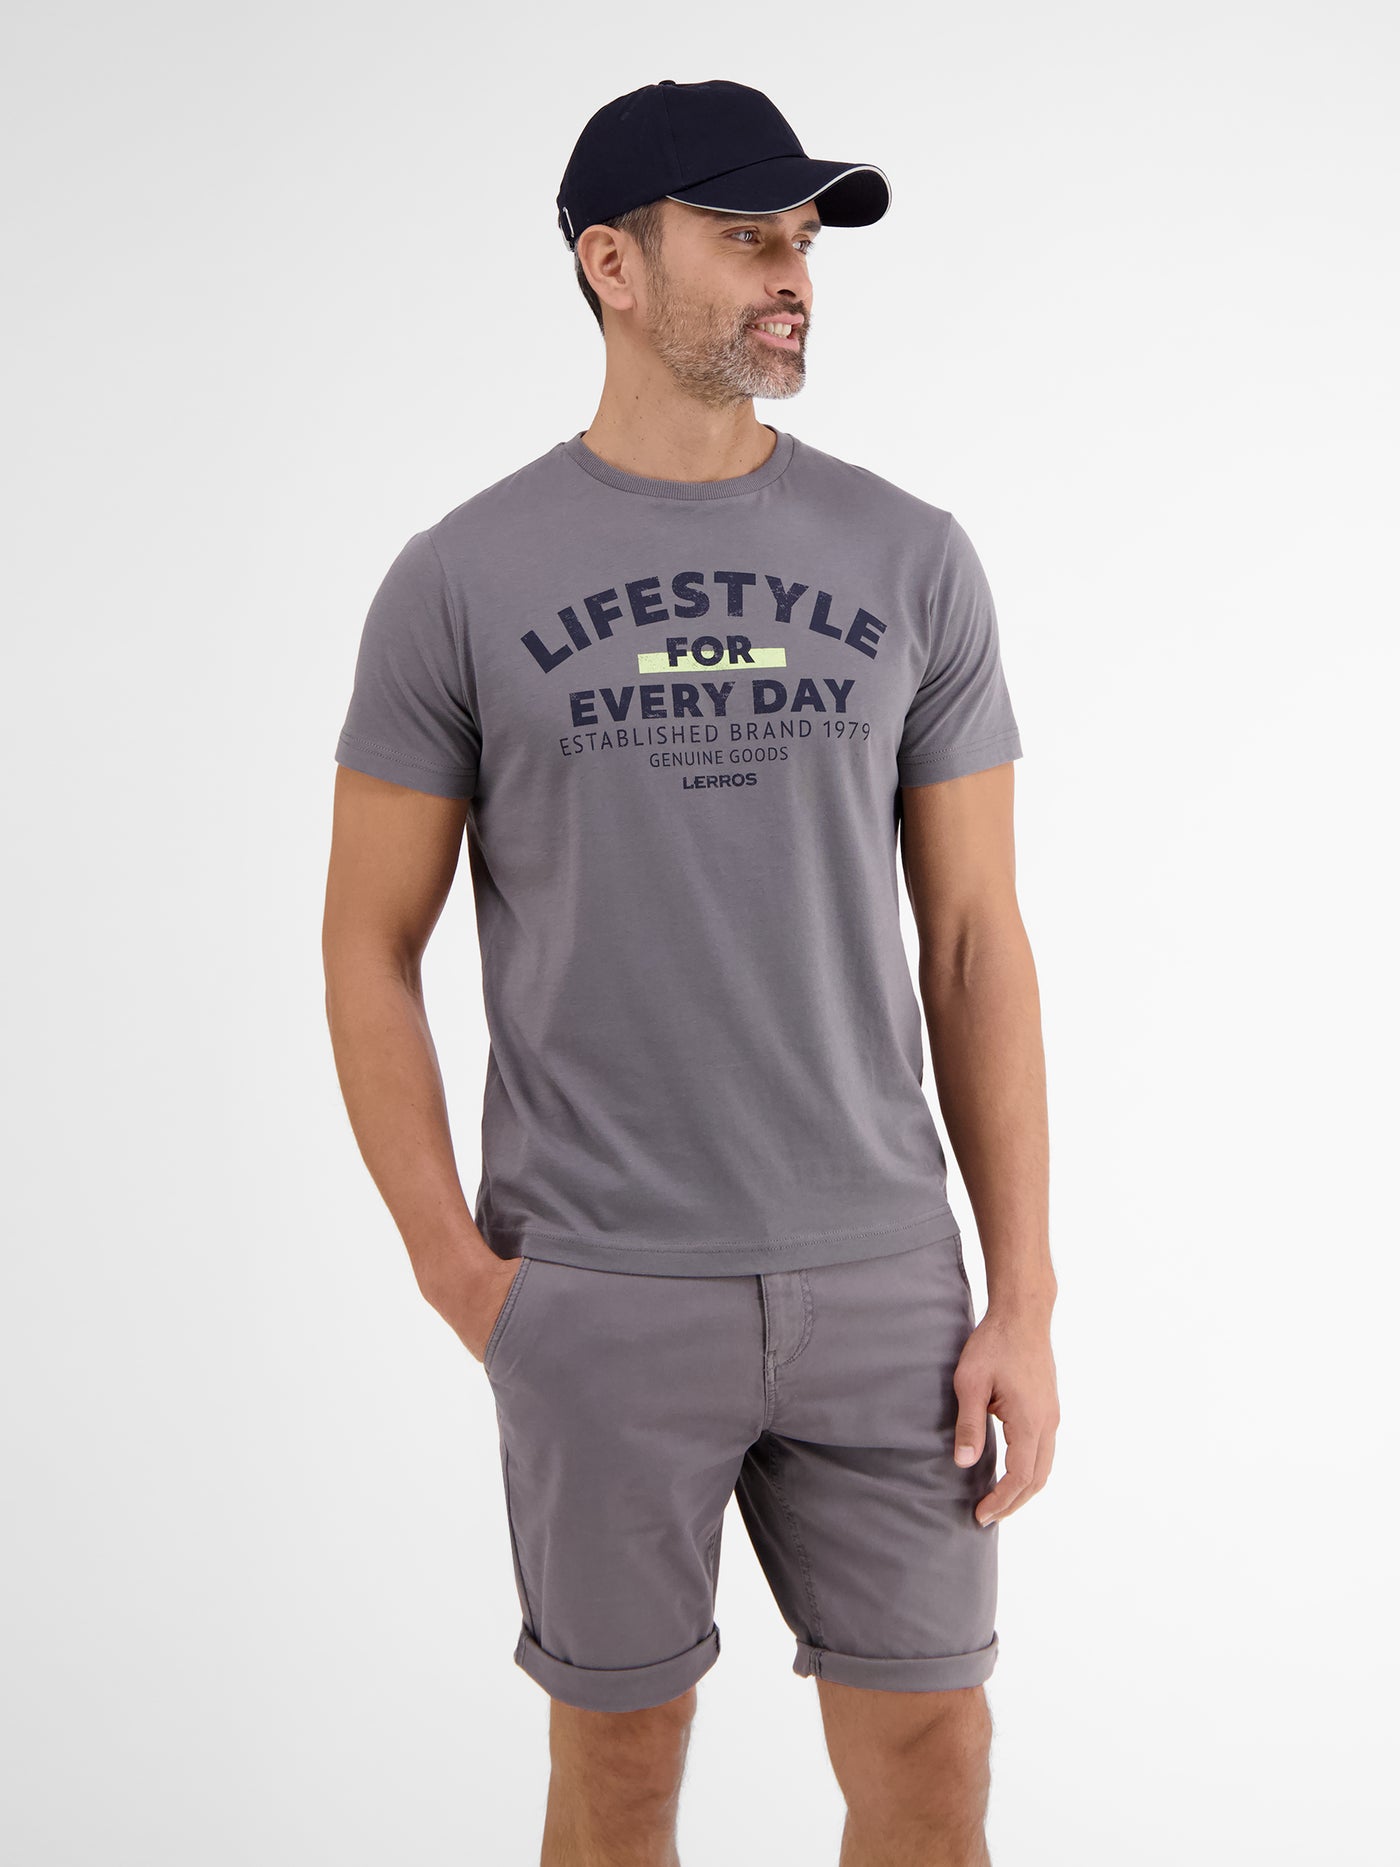 LERROS SHOP – T-Shirt day* for *Lifestyle every